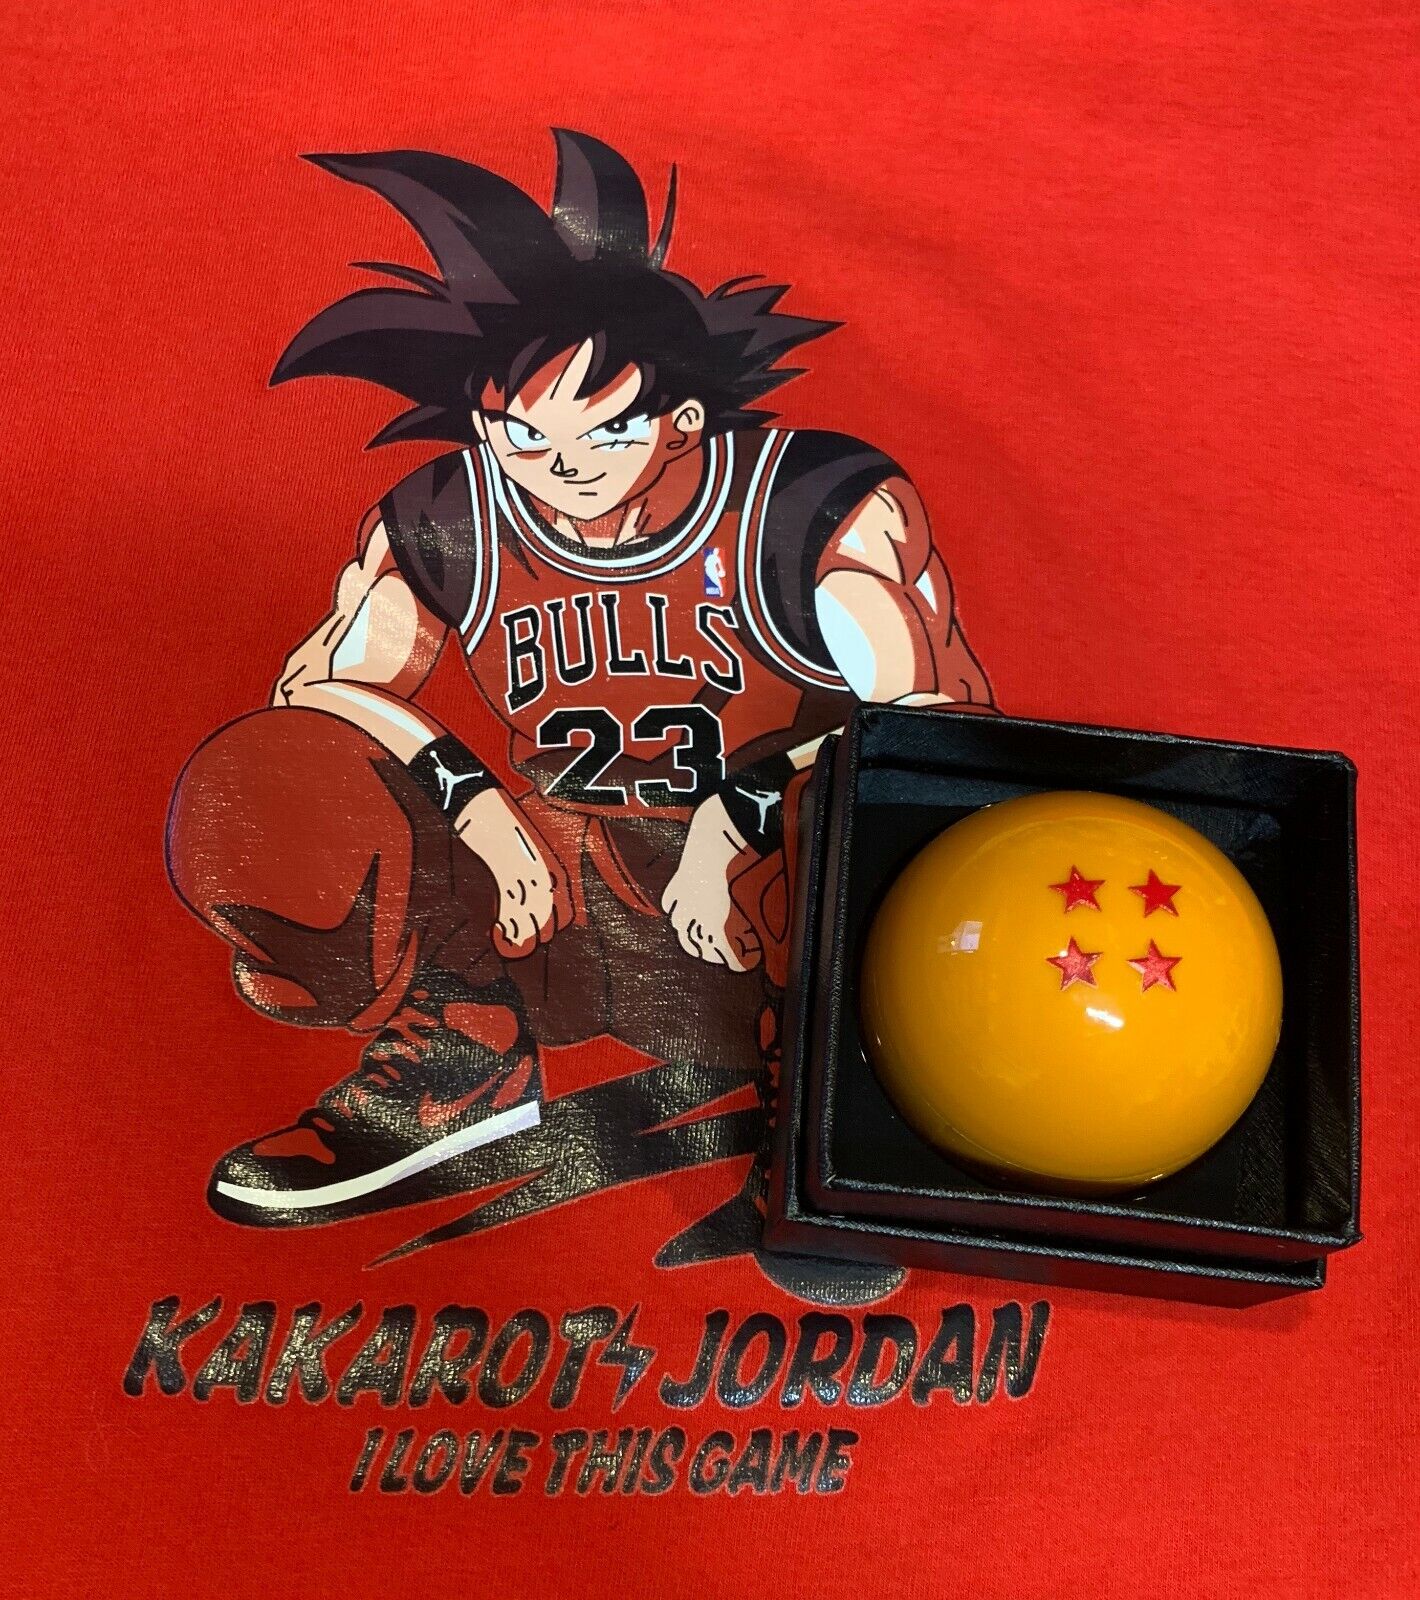 4 Star Dragon Ball Z Herb Spics Metal Grinder /Kitchen Crusher with Gift Box